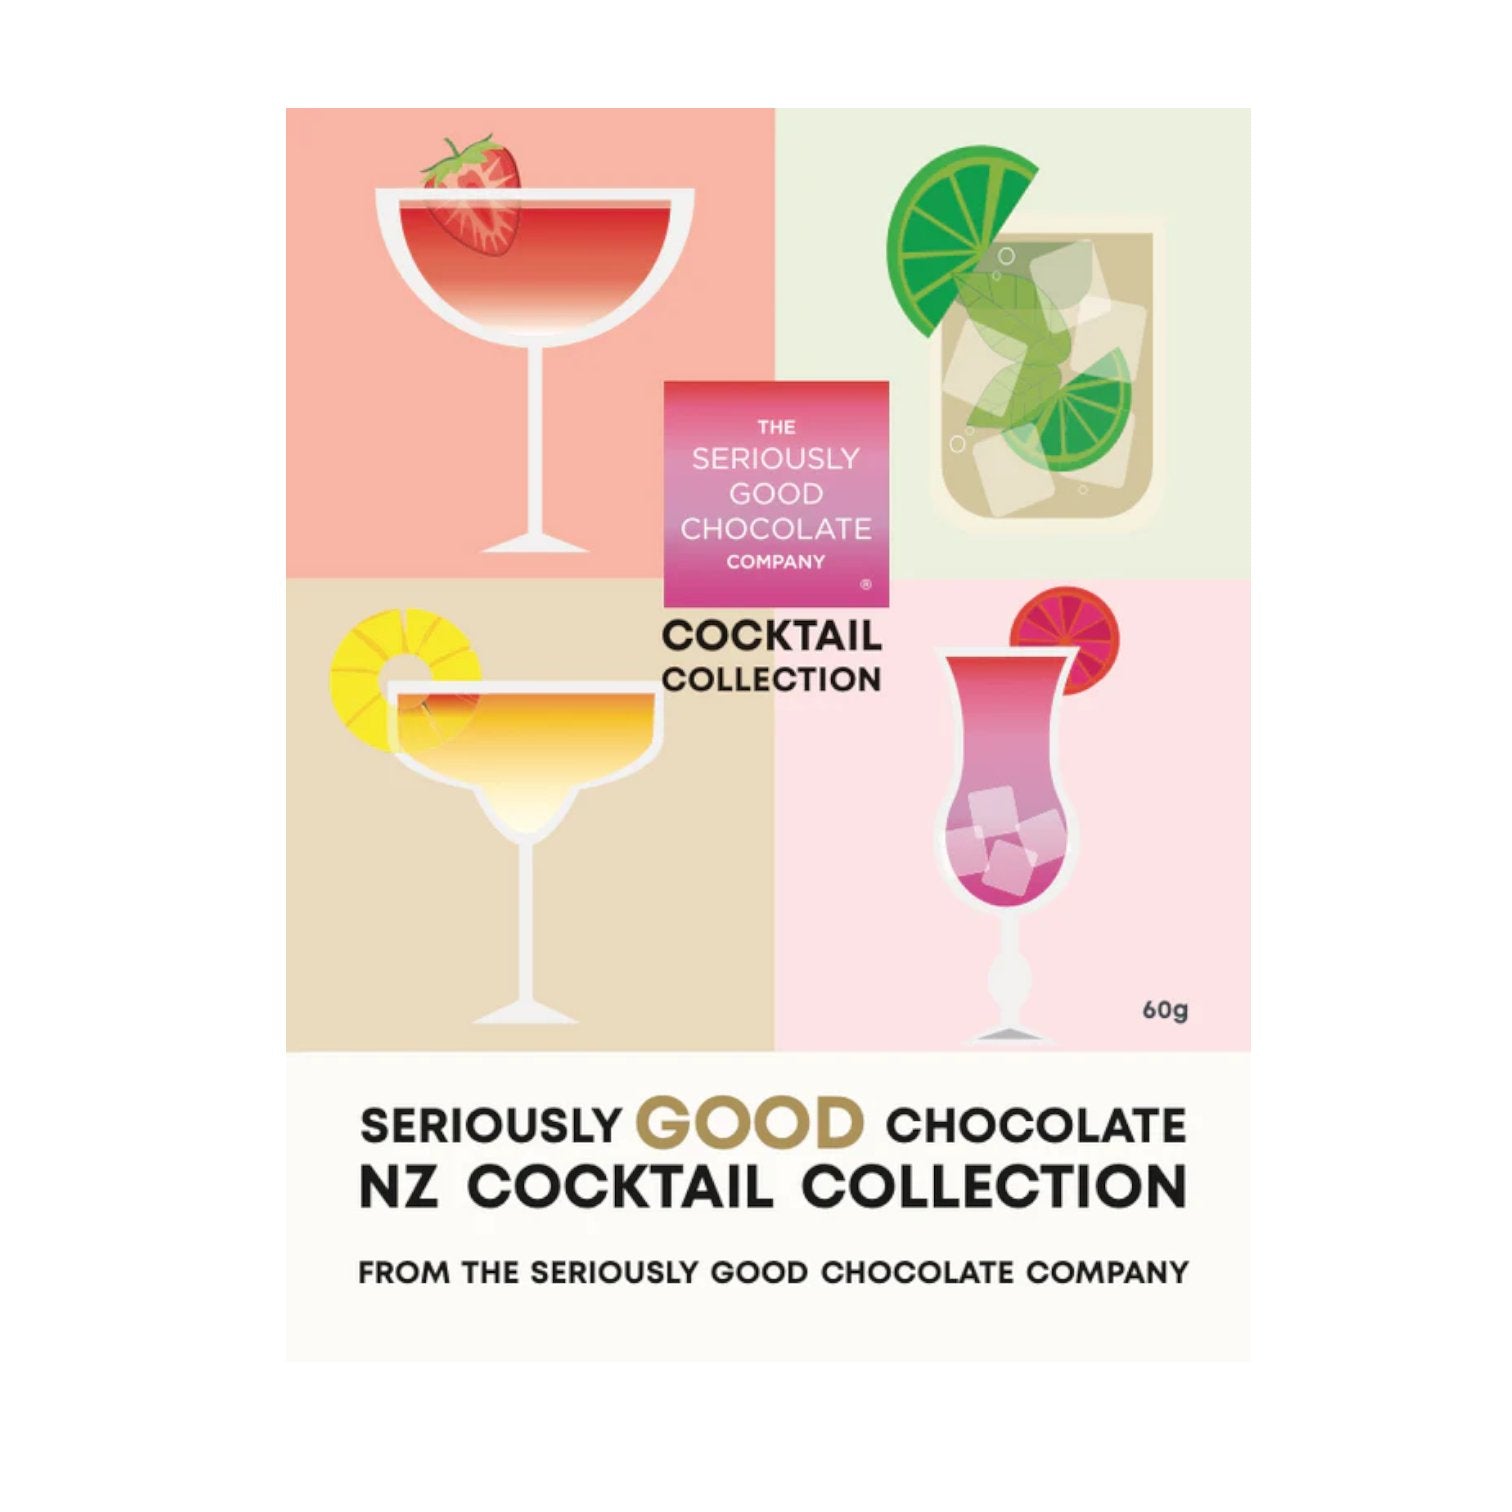 NZ Cocktail collection chocolates - Beautiful Gifts